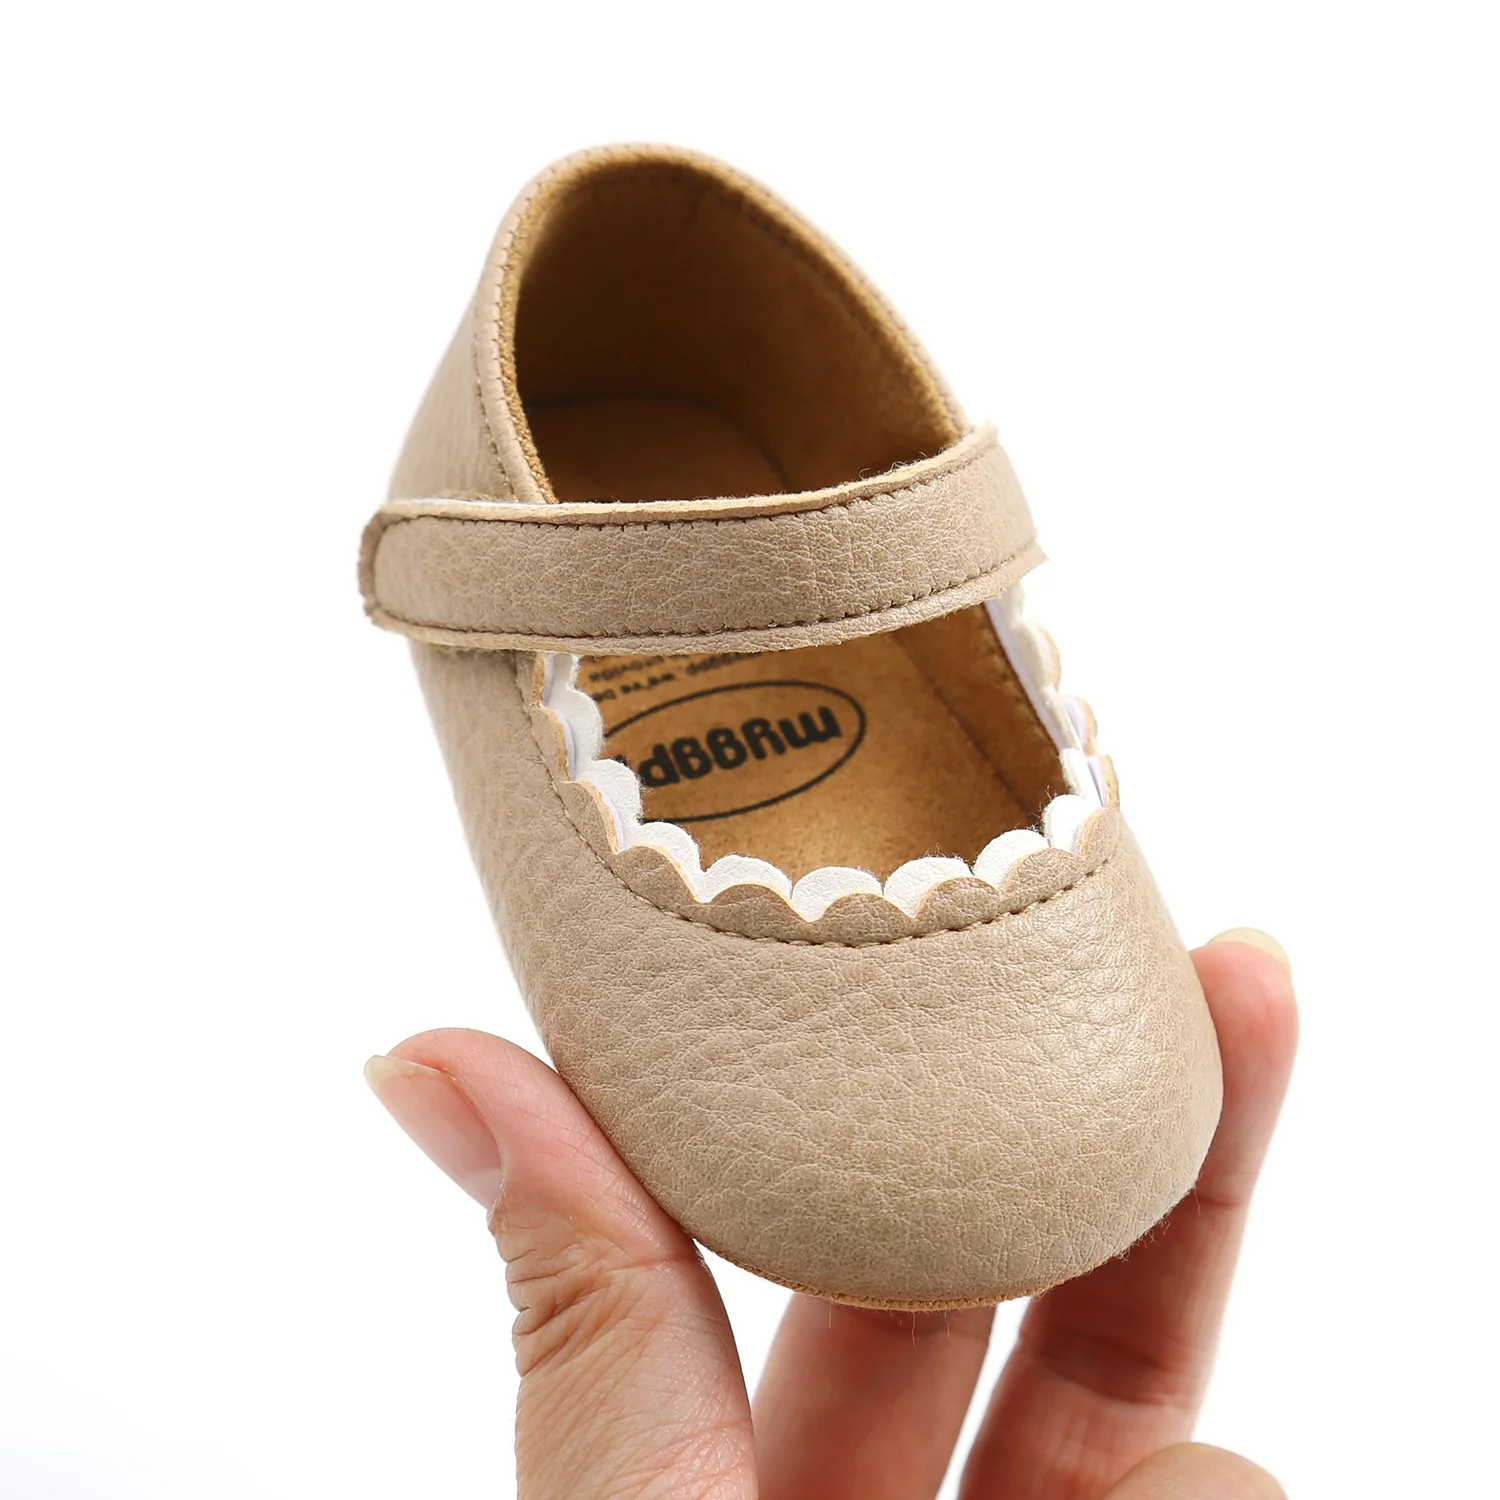 

Hot sale kids pre-walker shoes 0-12months luxury toddler baby girls princess shoes custom baby kids Moccasins shoes, White/black/yellow/light khaki/brown